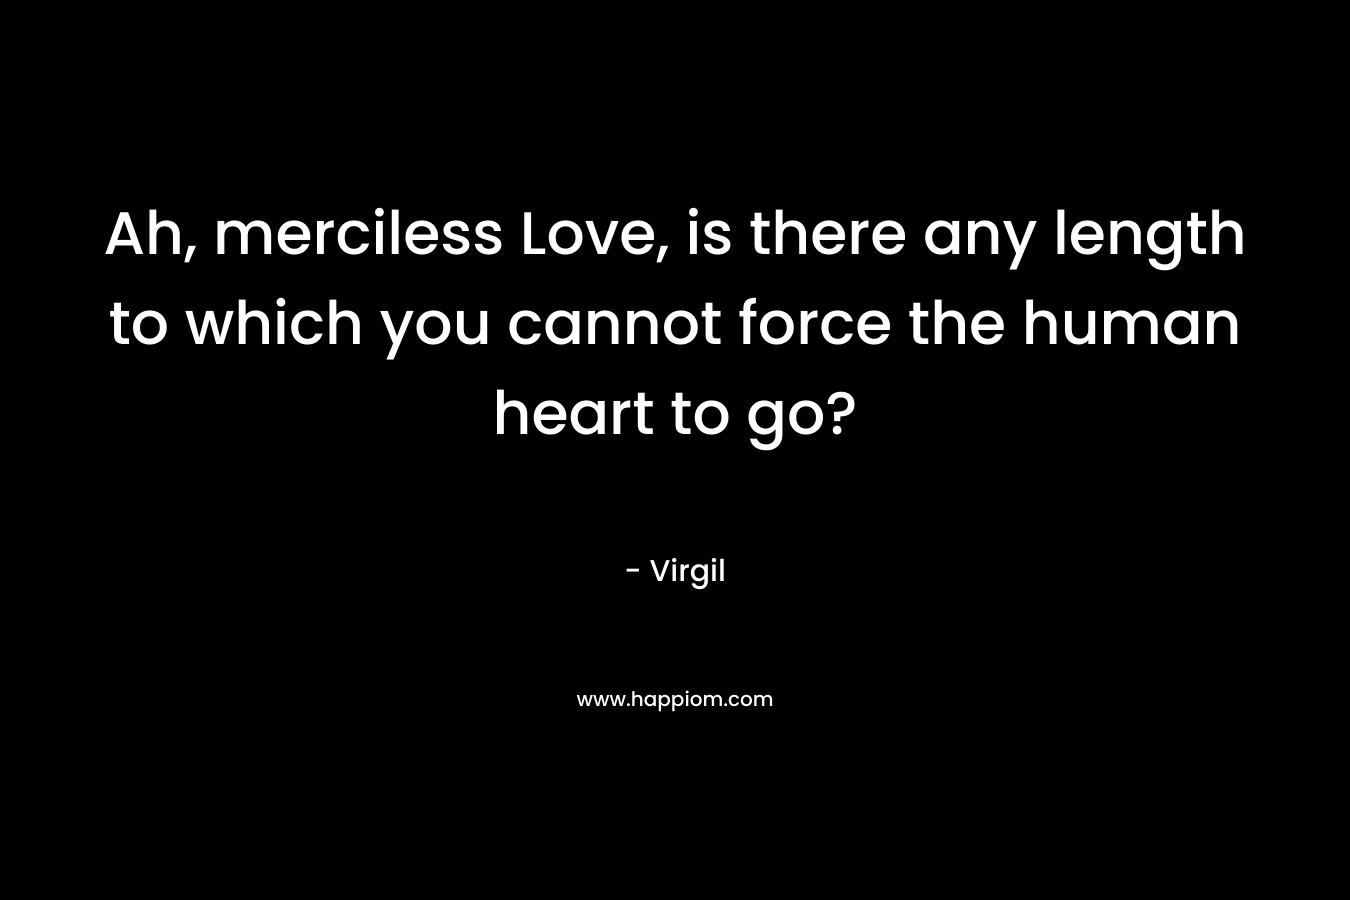 Ah, merciless Love, is there any length to which you cannot force the human heart to go?